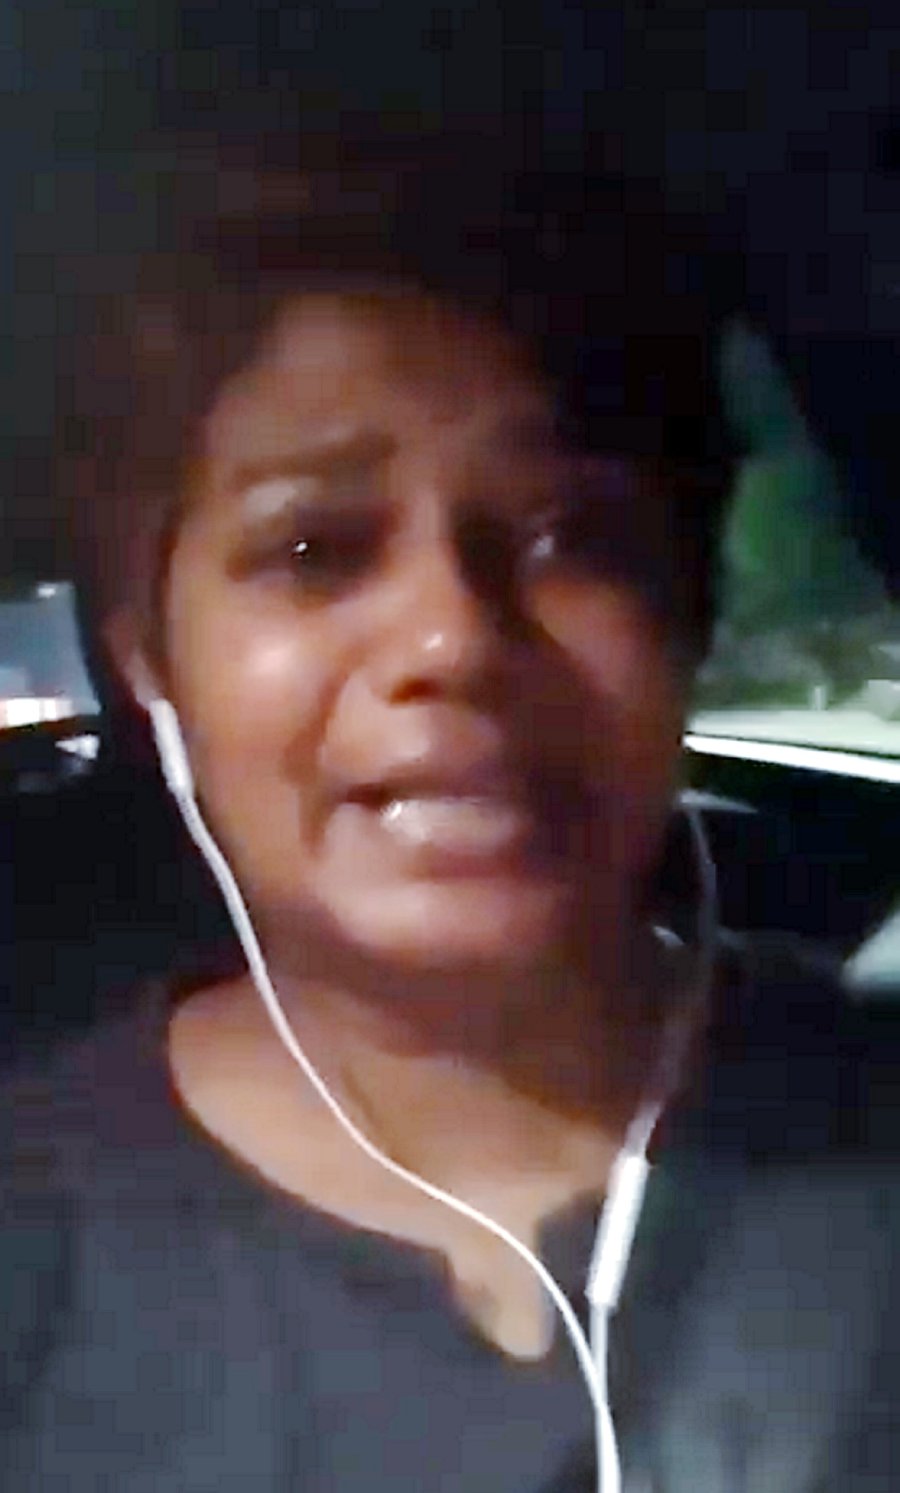 The woman, who claimed she was denied entry into Alam Damai police station in Cheras when she tried to seek protection from road bullies, said she has no plan to retract her police report. (Screen capture from video)